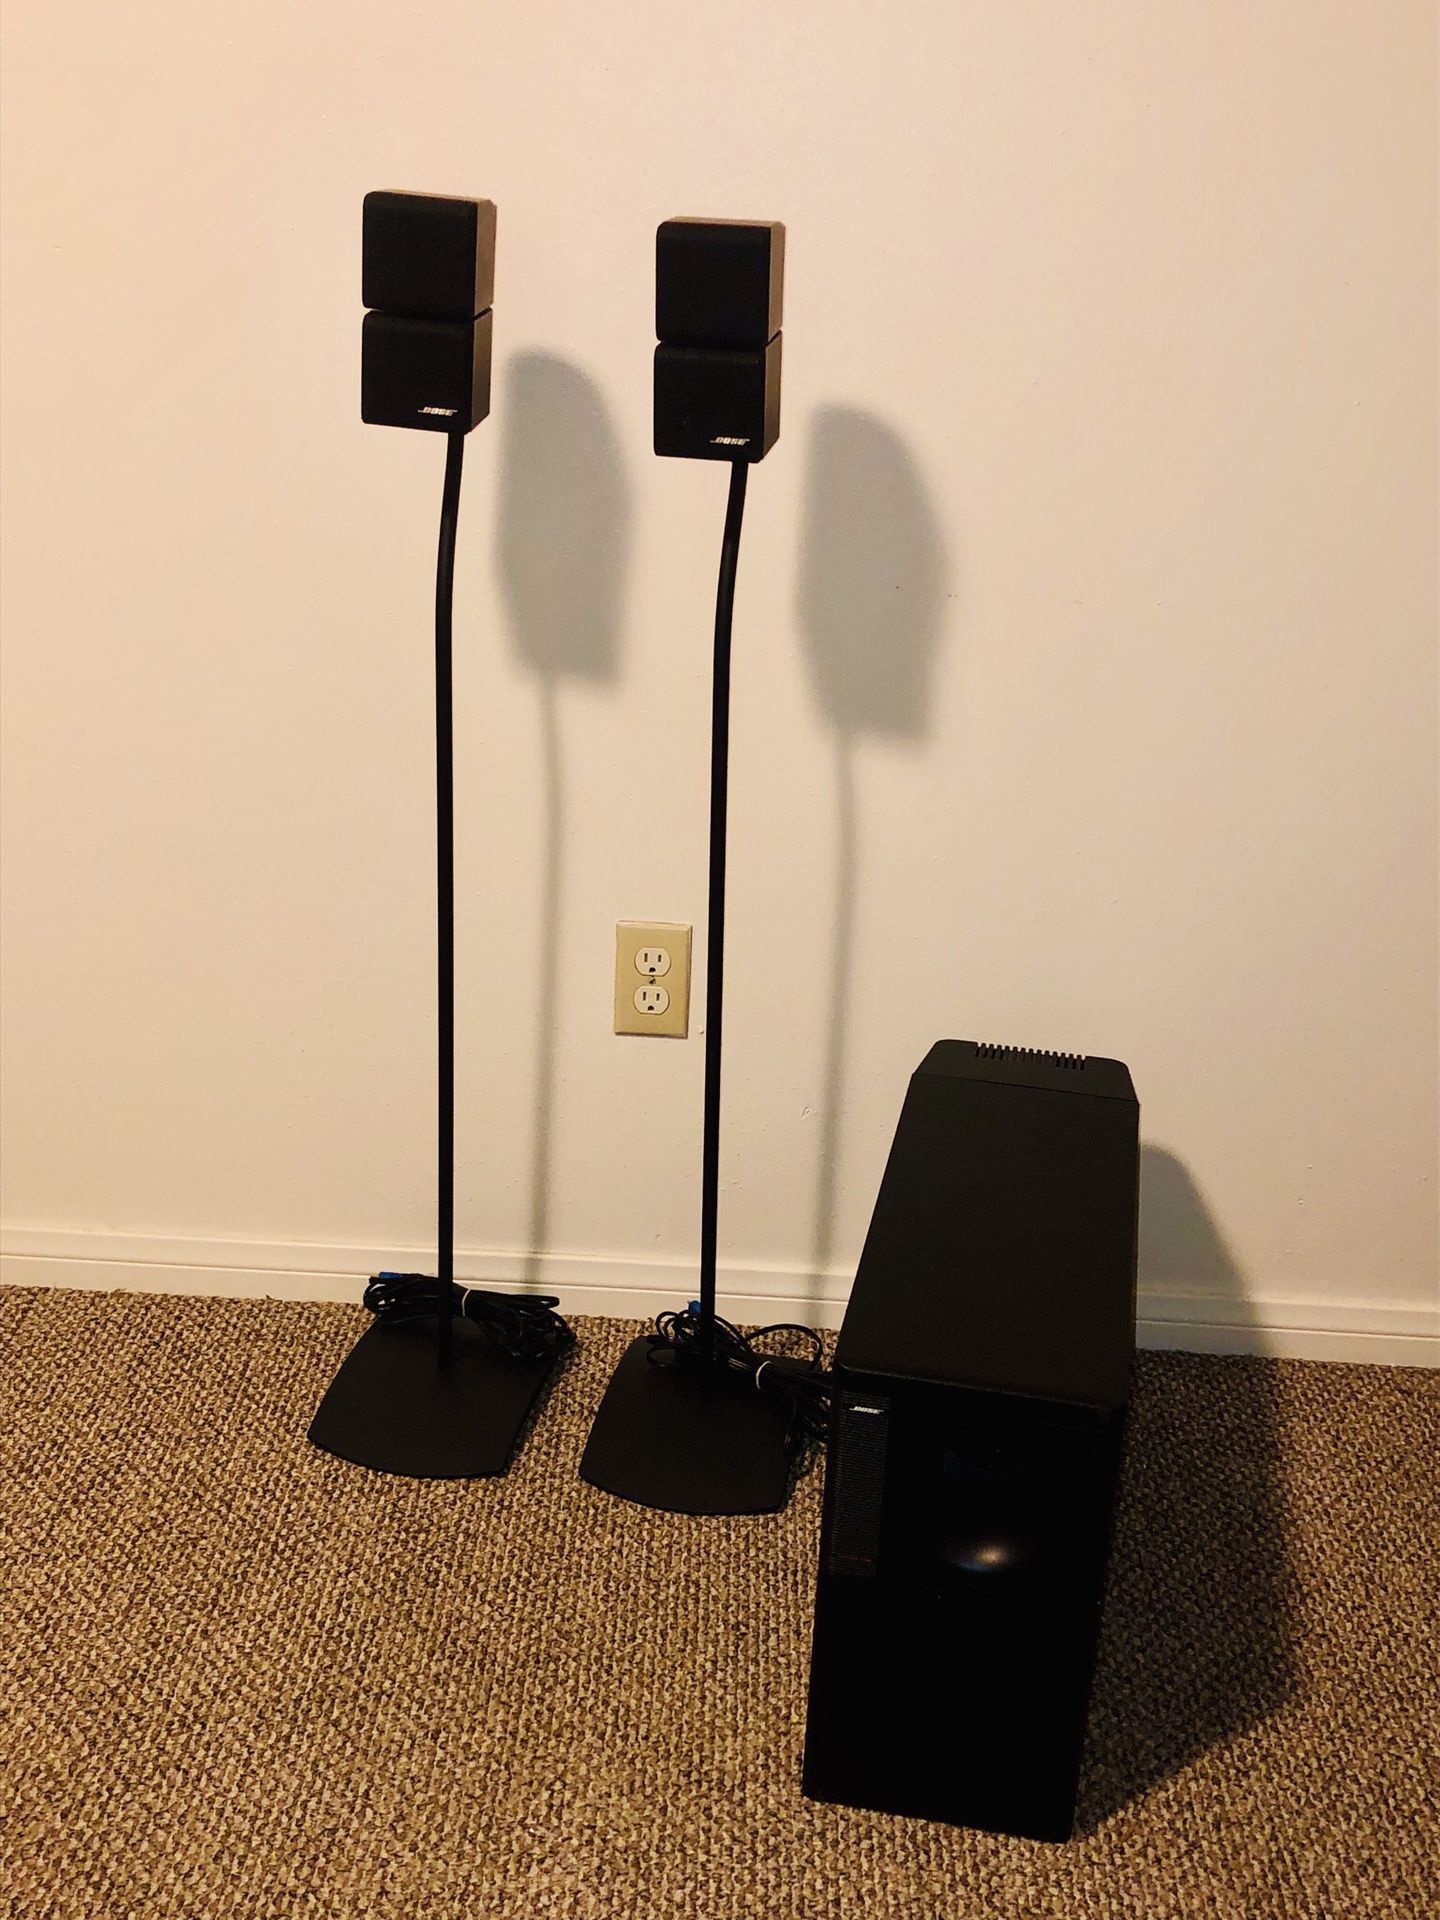 Manners respekt diameter BOSE REDLINE DOUBLE CUBE SPEAKERS W/ BOSE UFS20 STANDS & ACOUSTIMASS 5  SERIES III for Sale in San Diego, CA - OfferUp